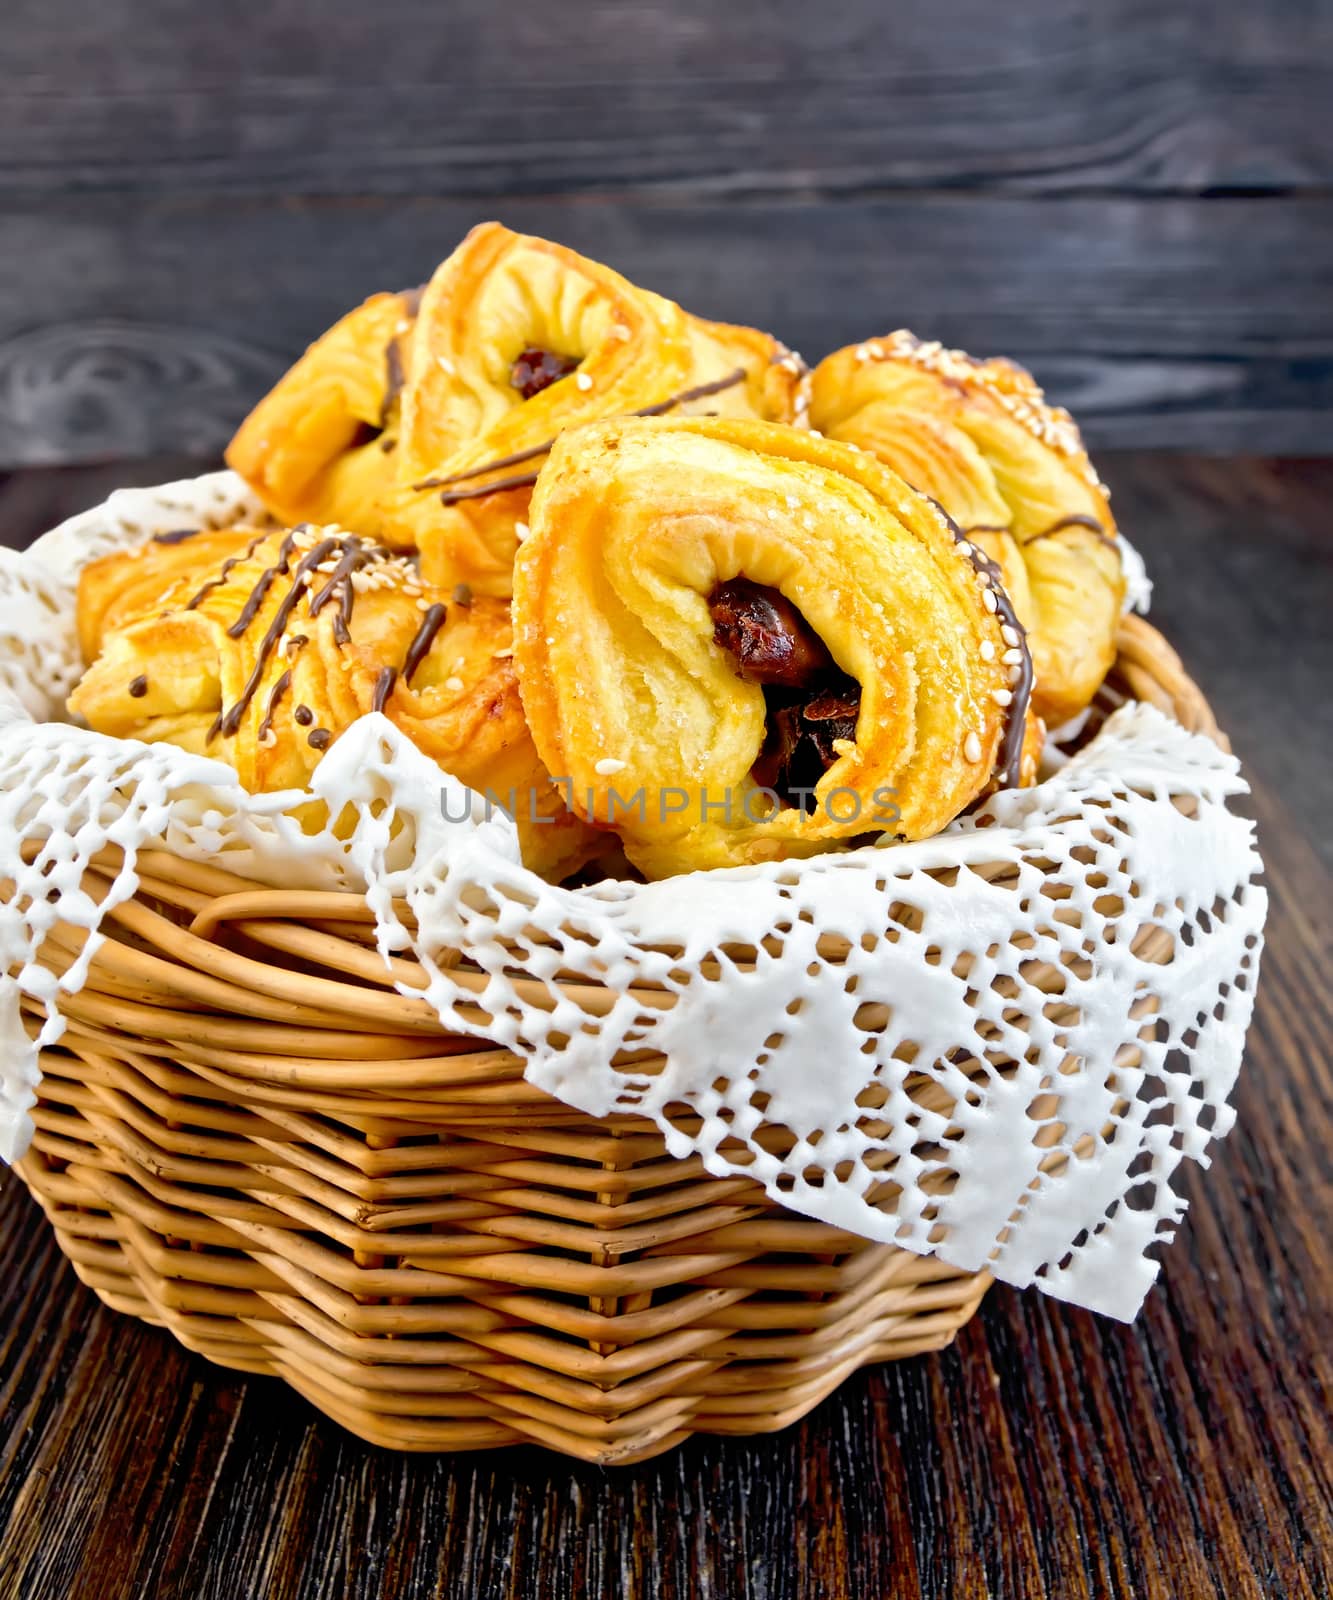 Cookies with dates in a wicker basket with a napkin on a dark wooden board